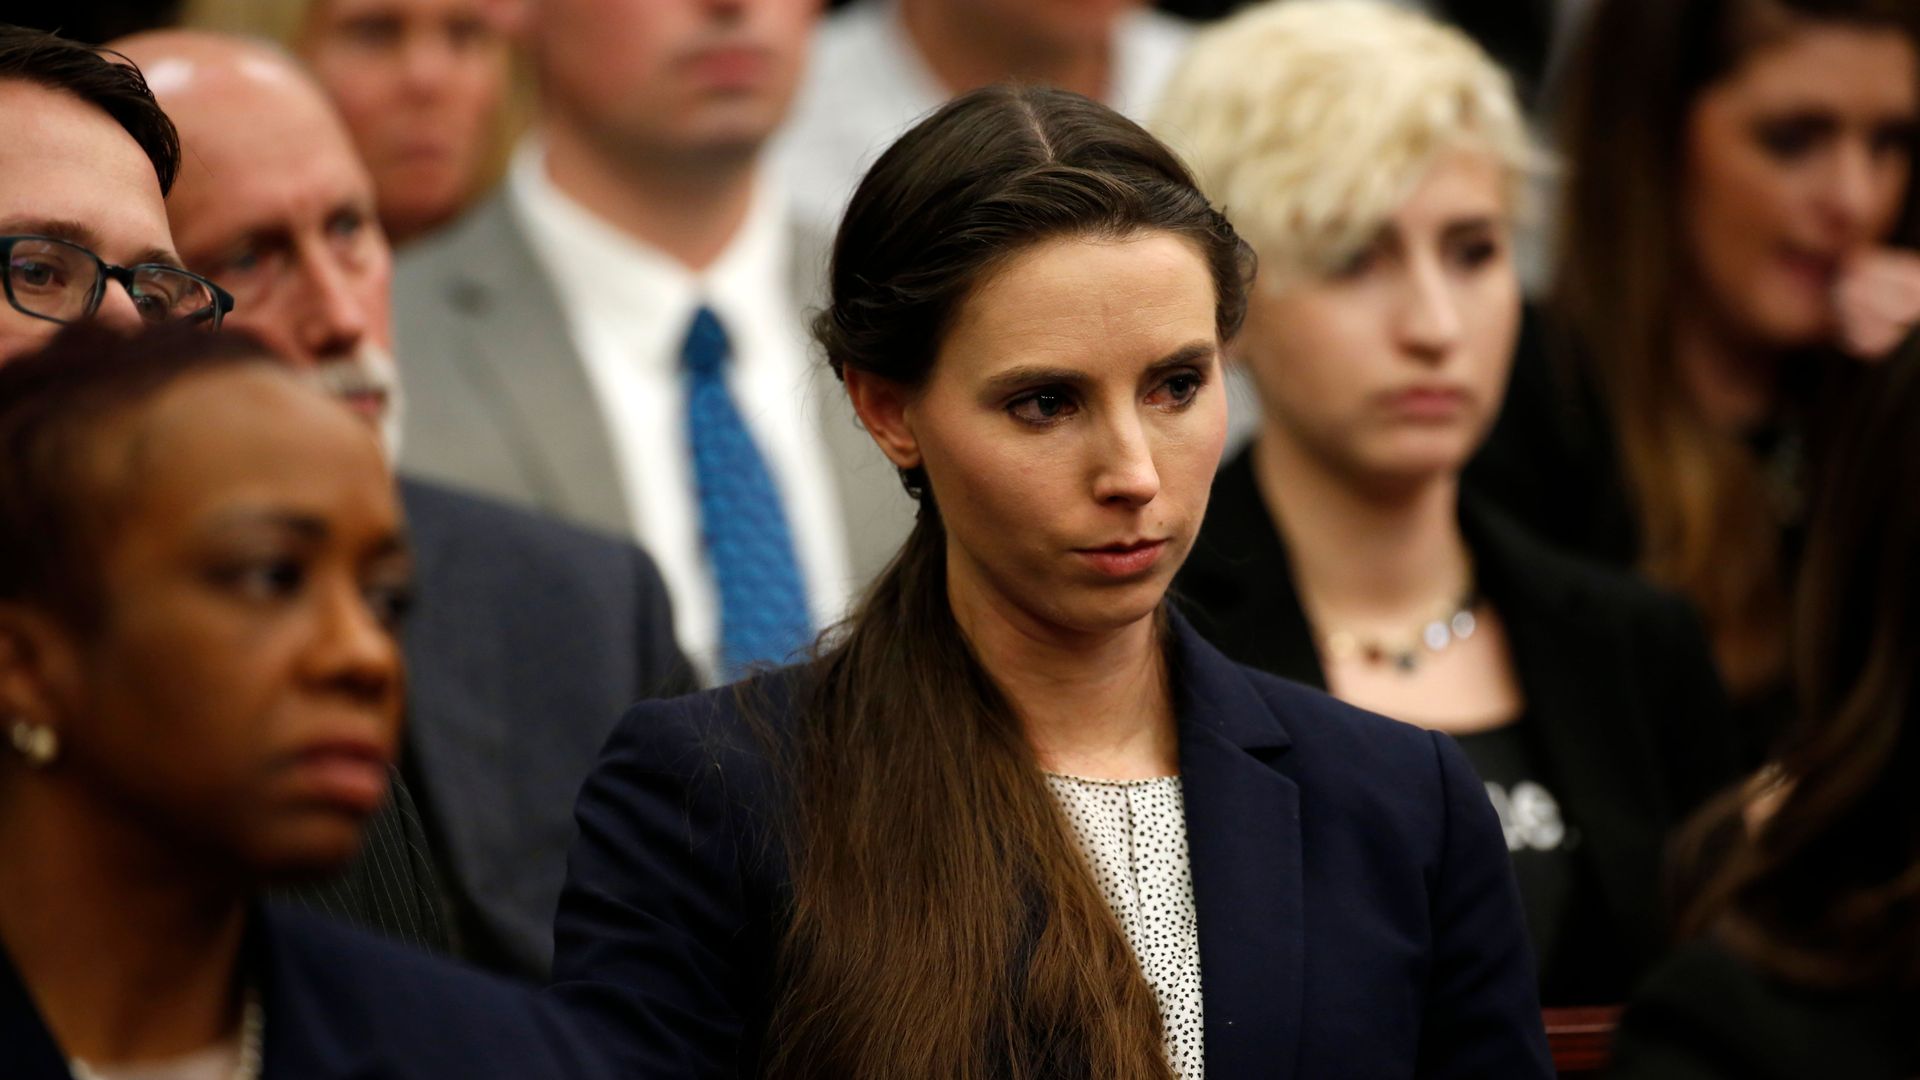 Rachael Denhollander who was victimized by former Michigan State University and USA Gymnastics doctor Larry Nassar.